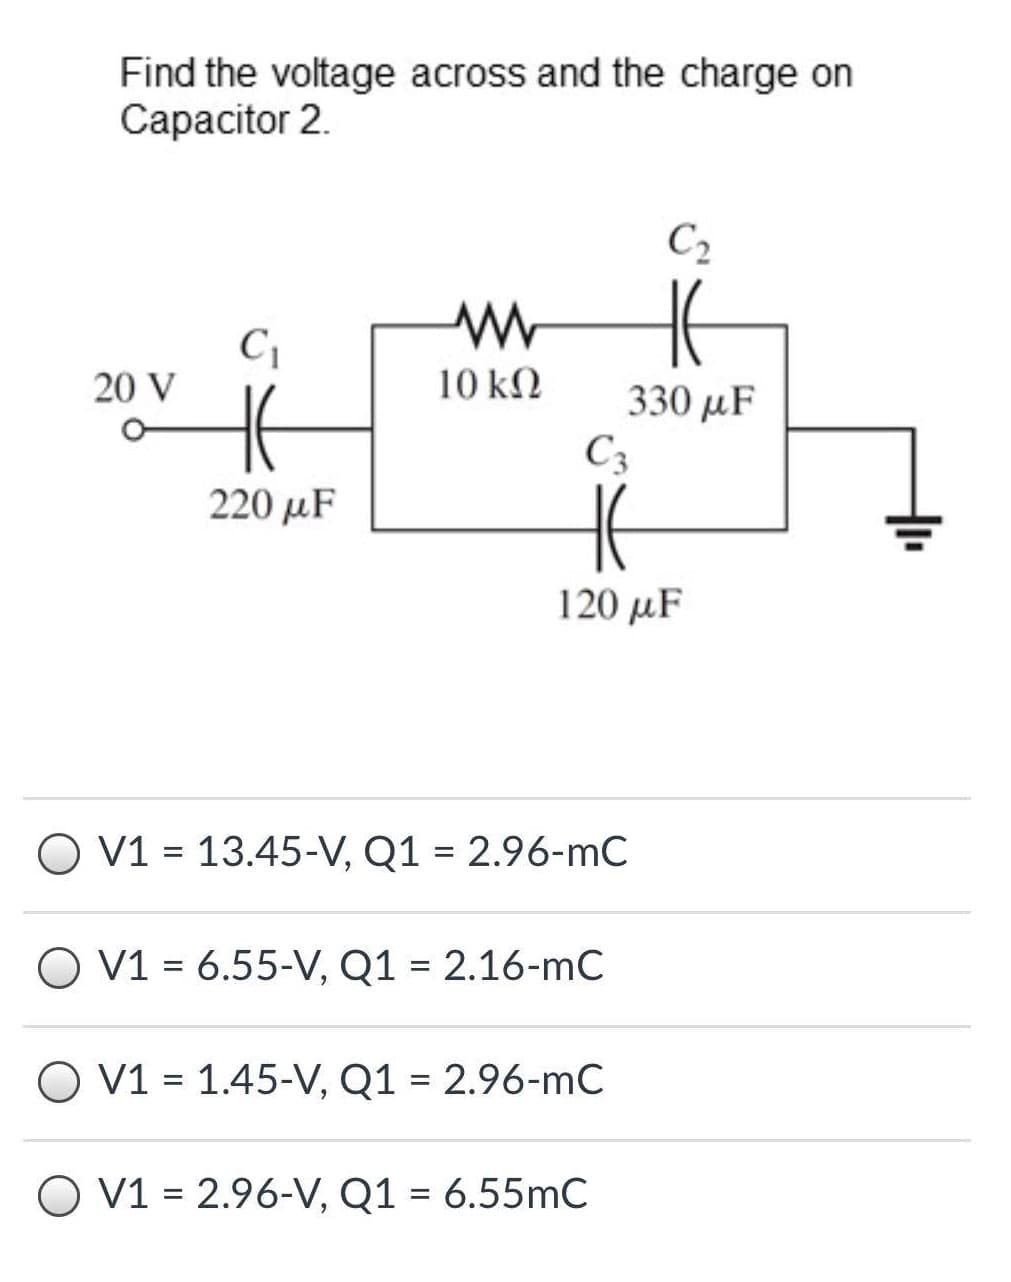 Find the voltage across and the charge on
Сарacitor 2.
C2
20 V
10 k.
330 µF
C3
220 µF
120 μF
O V1 = 13.45-V, Q1 = 2.96-mC
O V1 = 6.55-V, Q1 = 2.16-mC
O V1 = 1.45-V, Q1 = 2.96-mC
O V1 = 2.96-V, Q1 = 6.55mC
